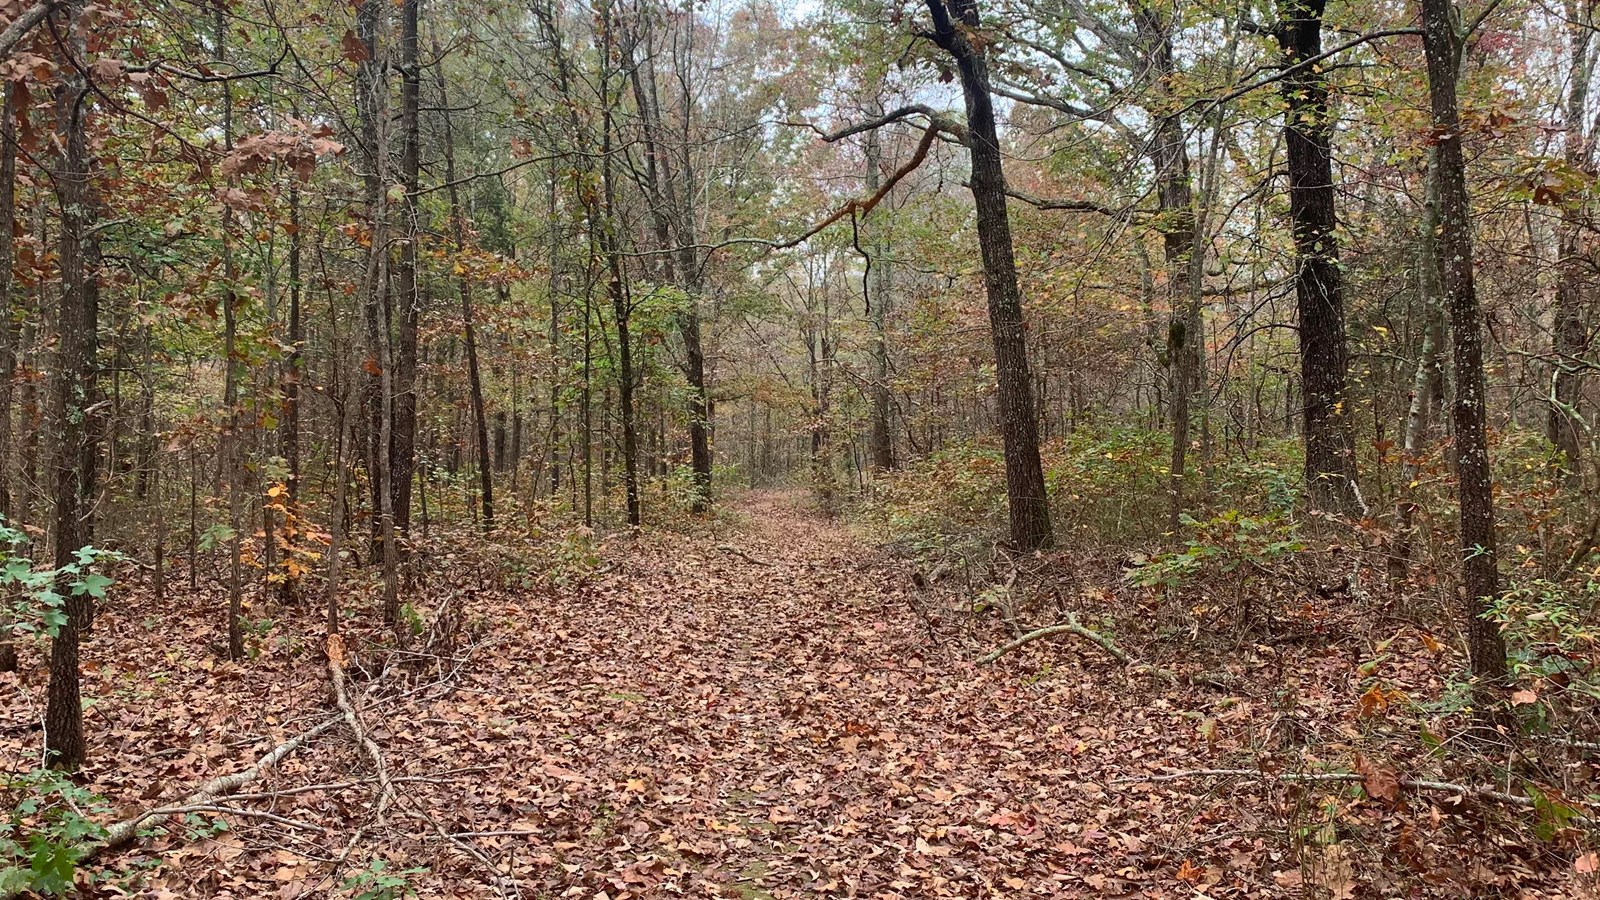 Hiking trail covered in leaves in late fall. Trail is surrounds by trees